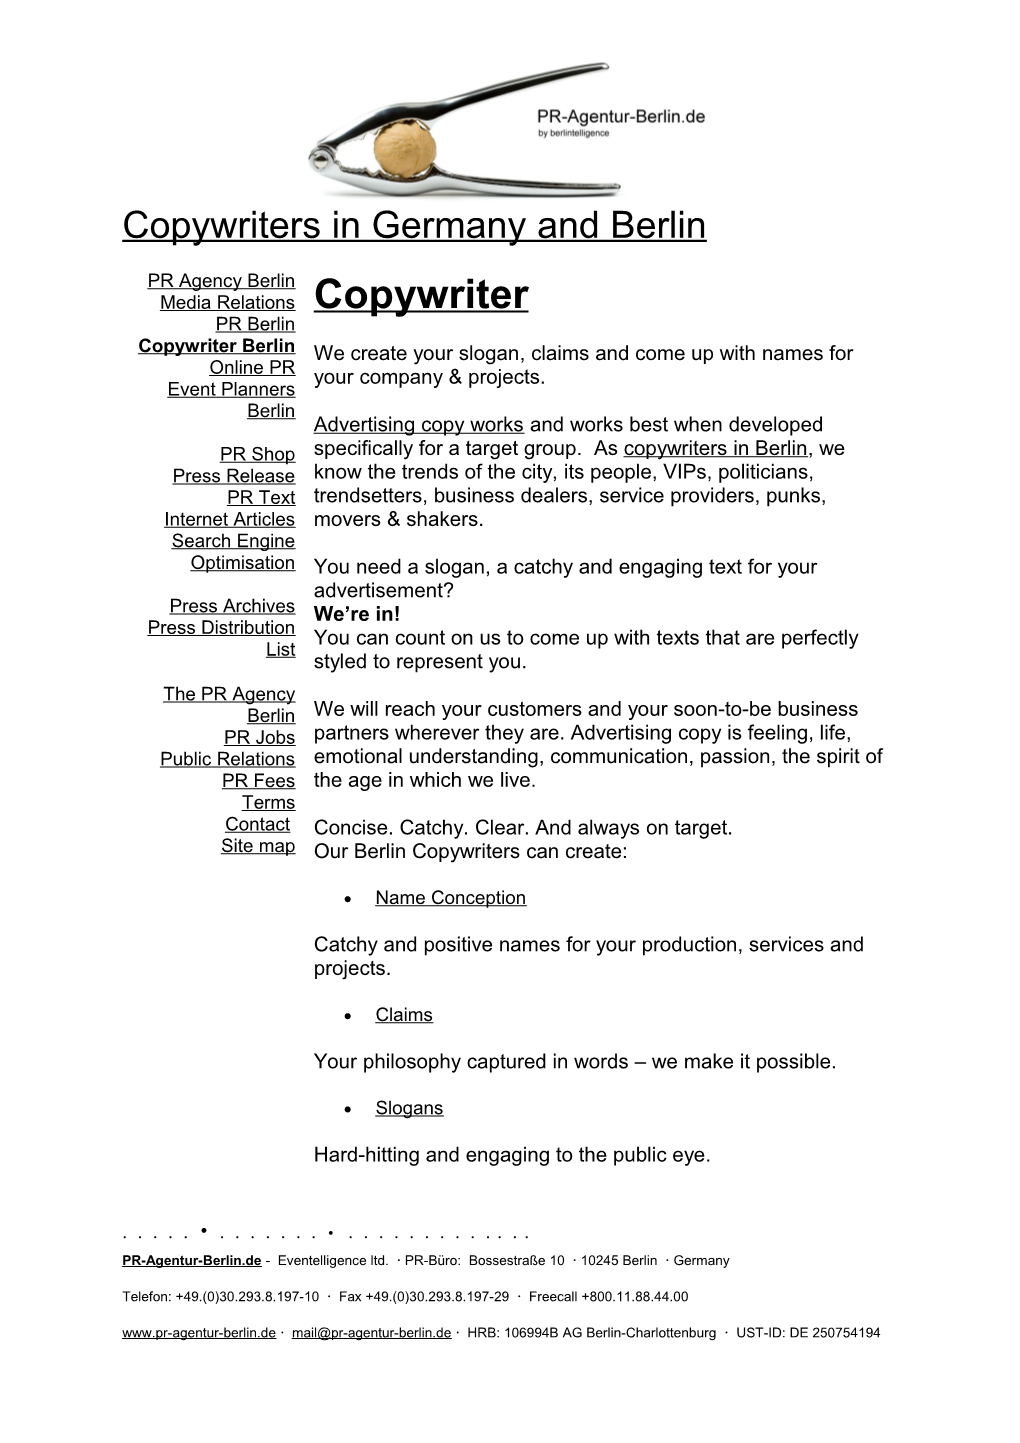 Copywriters in Germany and Berlin